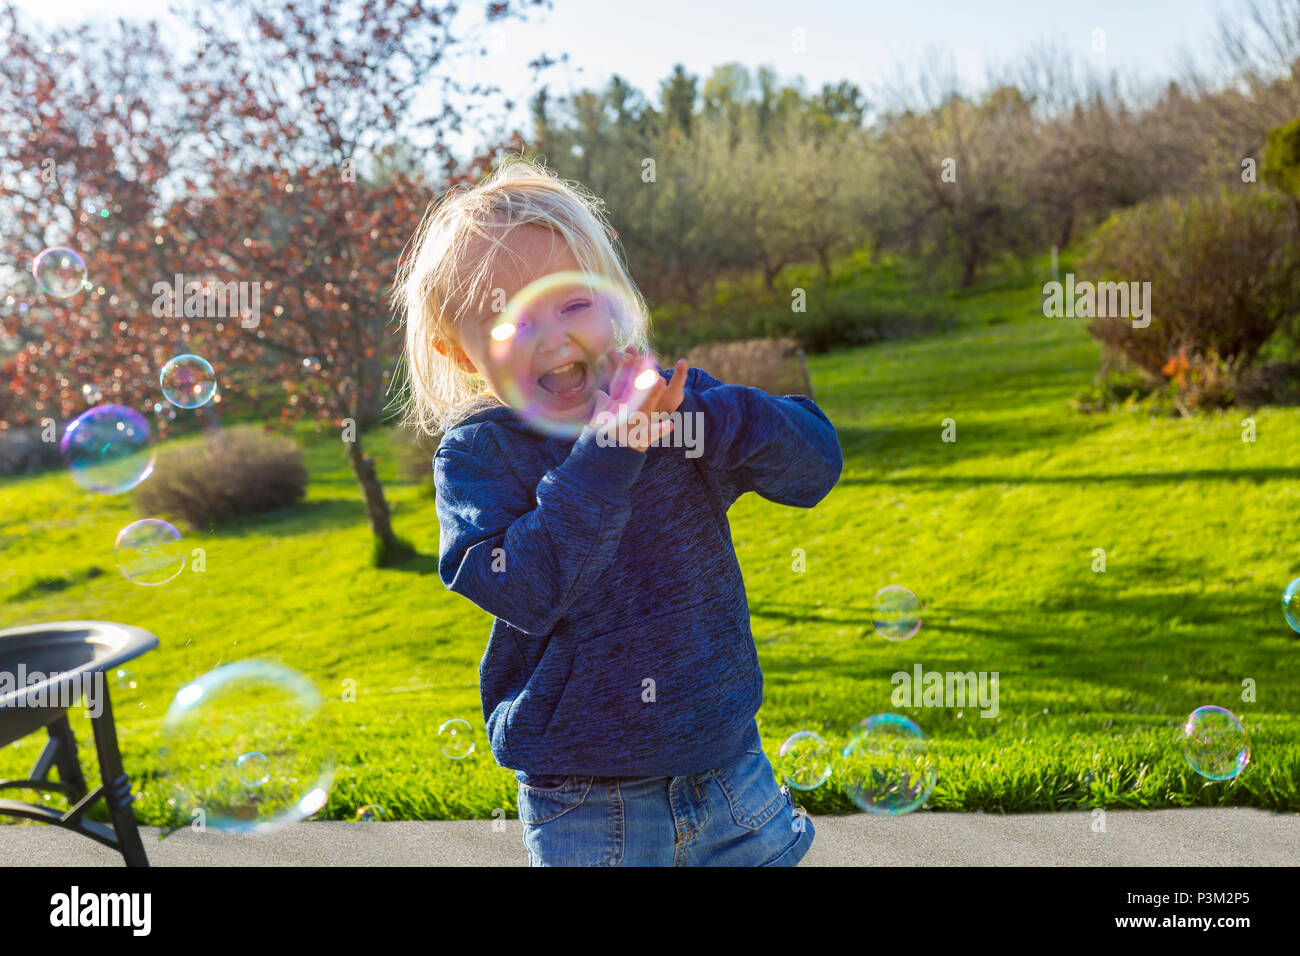 Caucasian toddler playing with soap bubbles outdoors Stock Photo